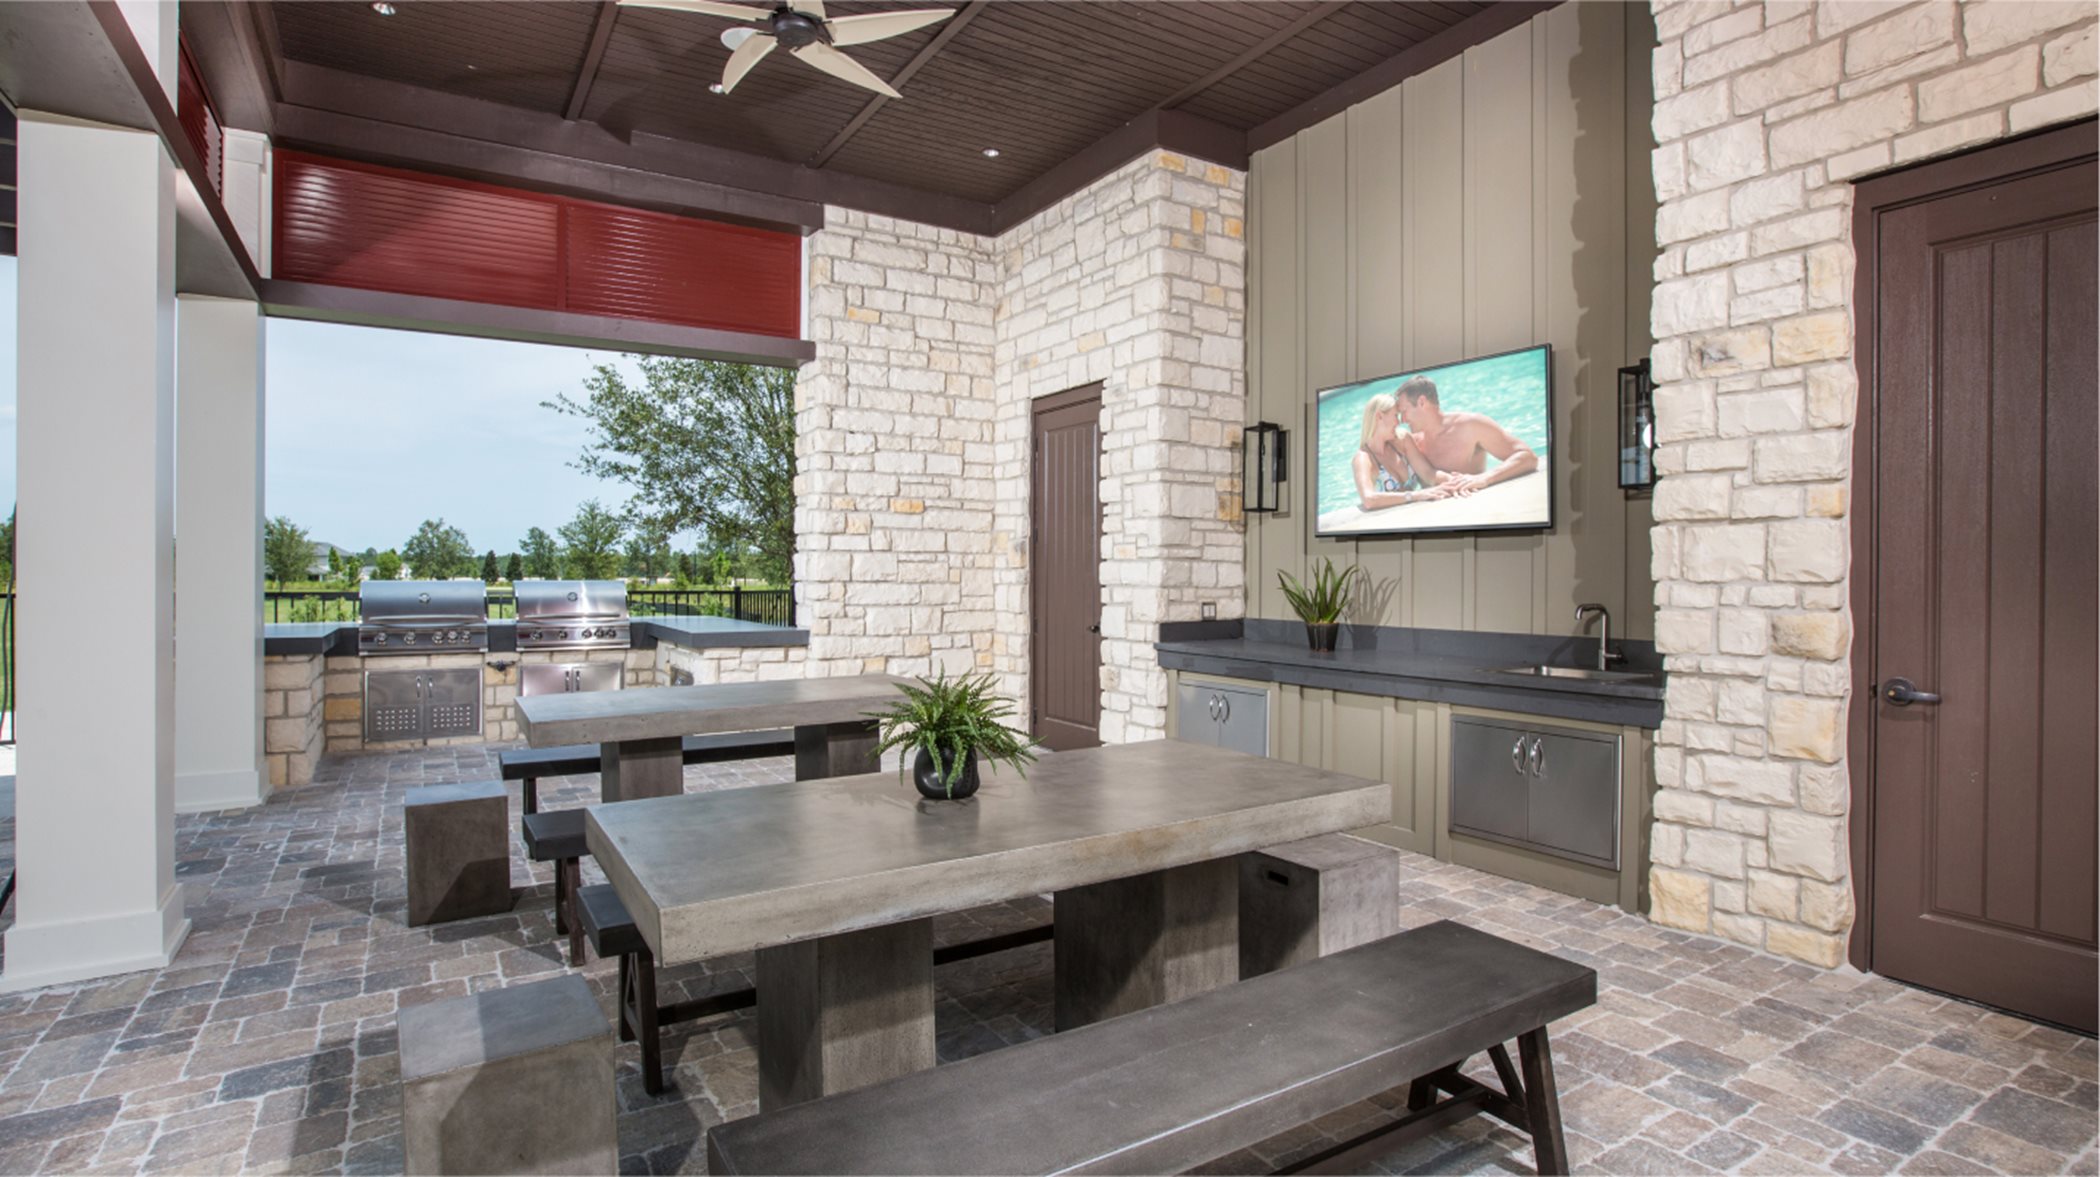 Outdoor grill area with BBQ stations, tables and Tv atop the sink